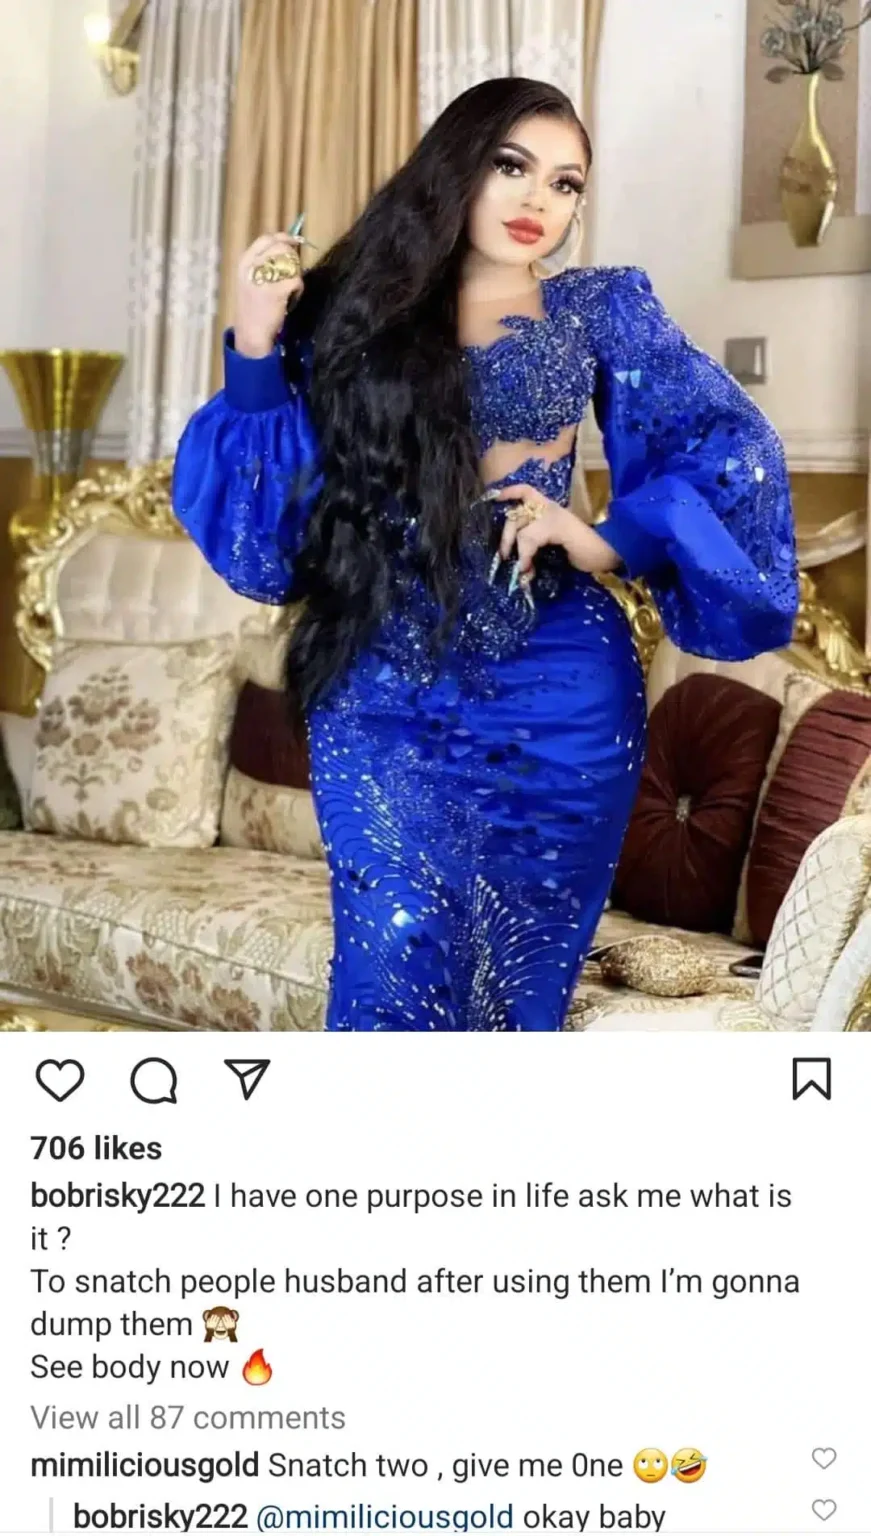 My Main Aim Is To Snatch People's Husbands: Bobrisky